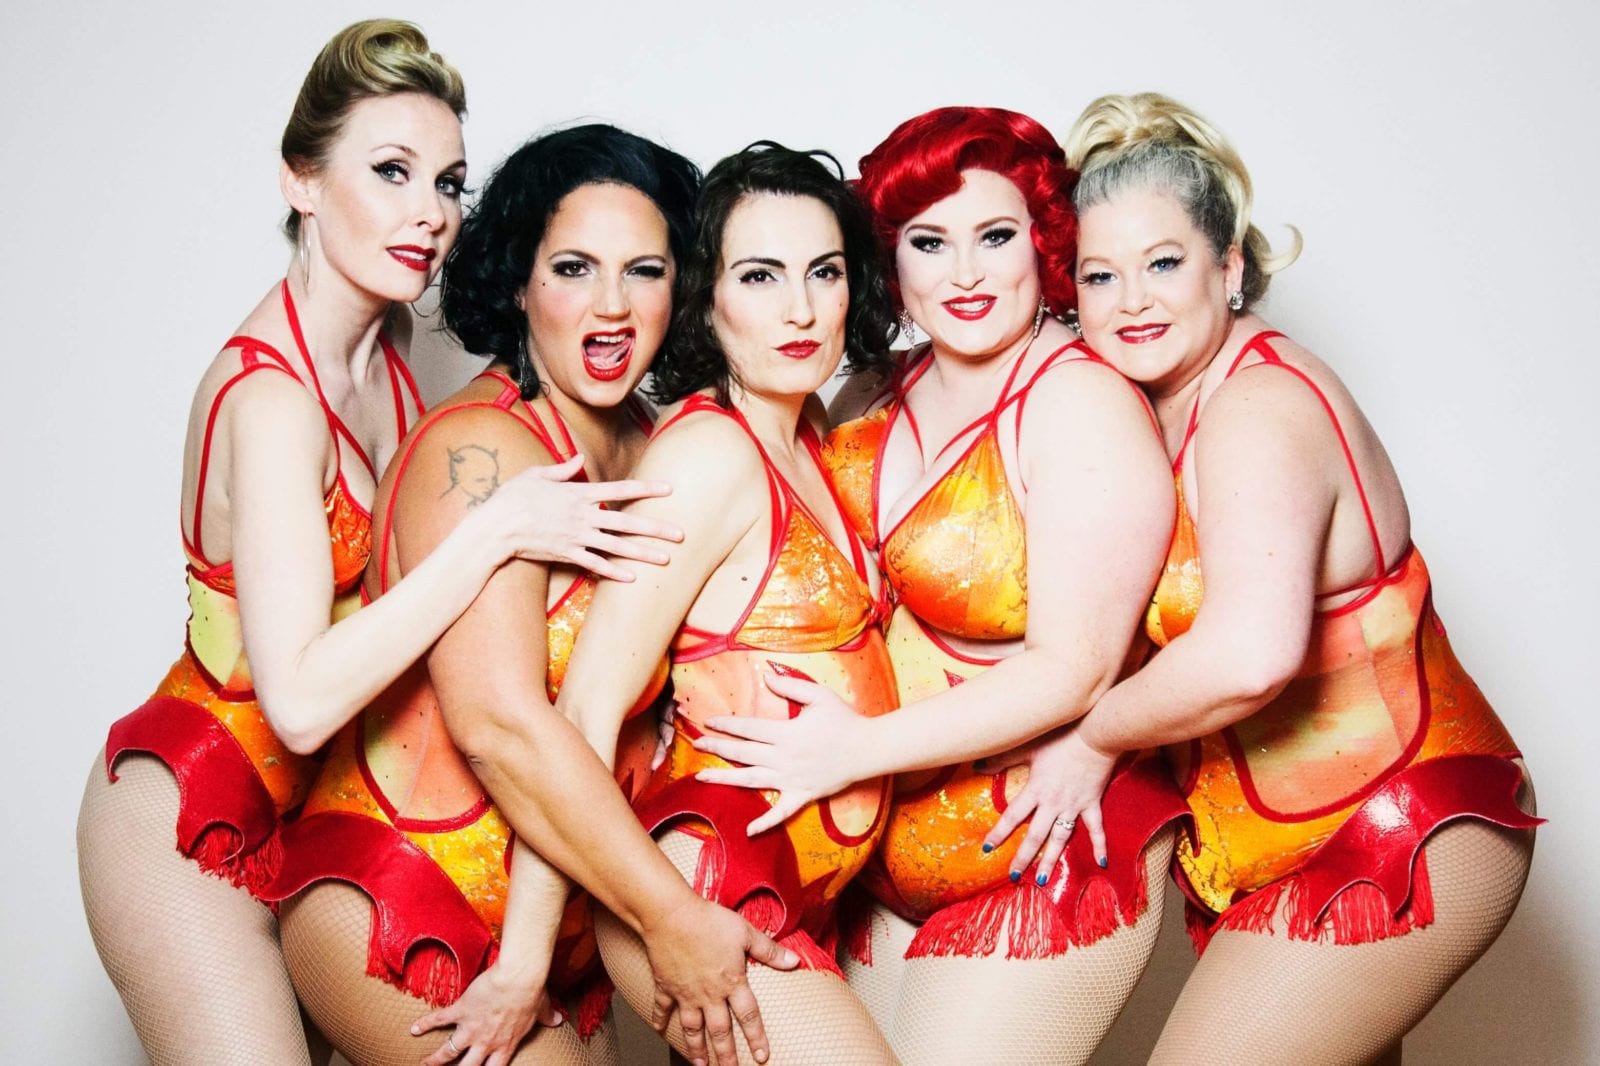 Ring in the New Years with the Brazen Belles